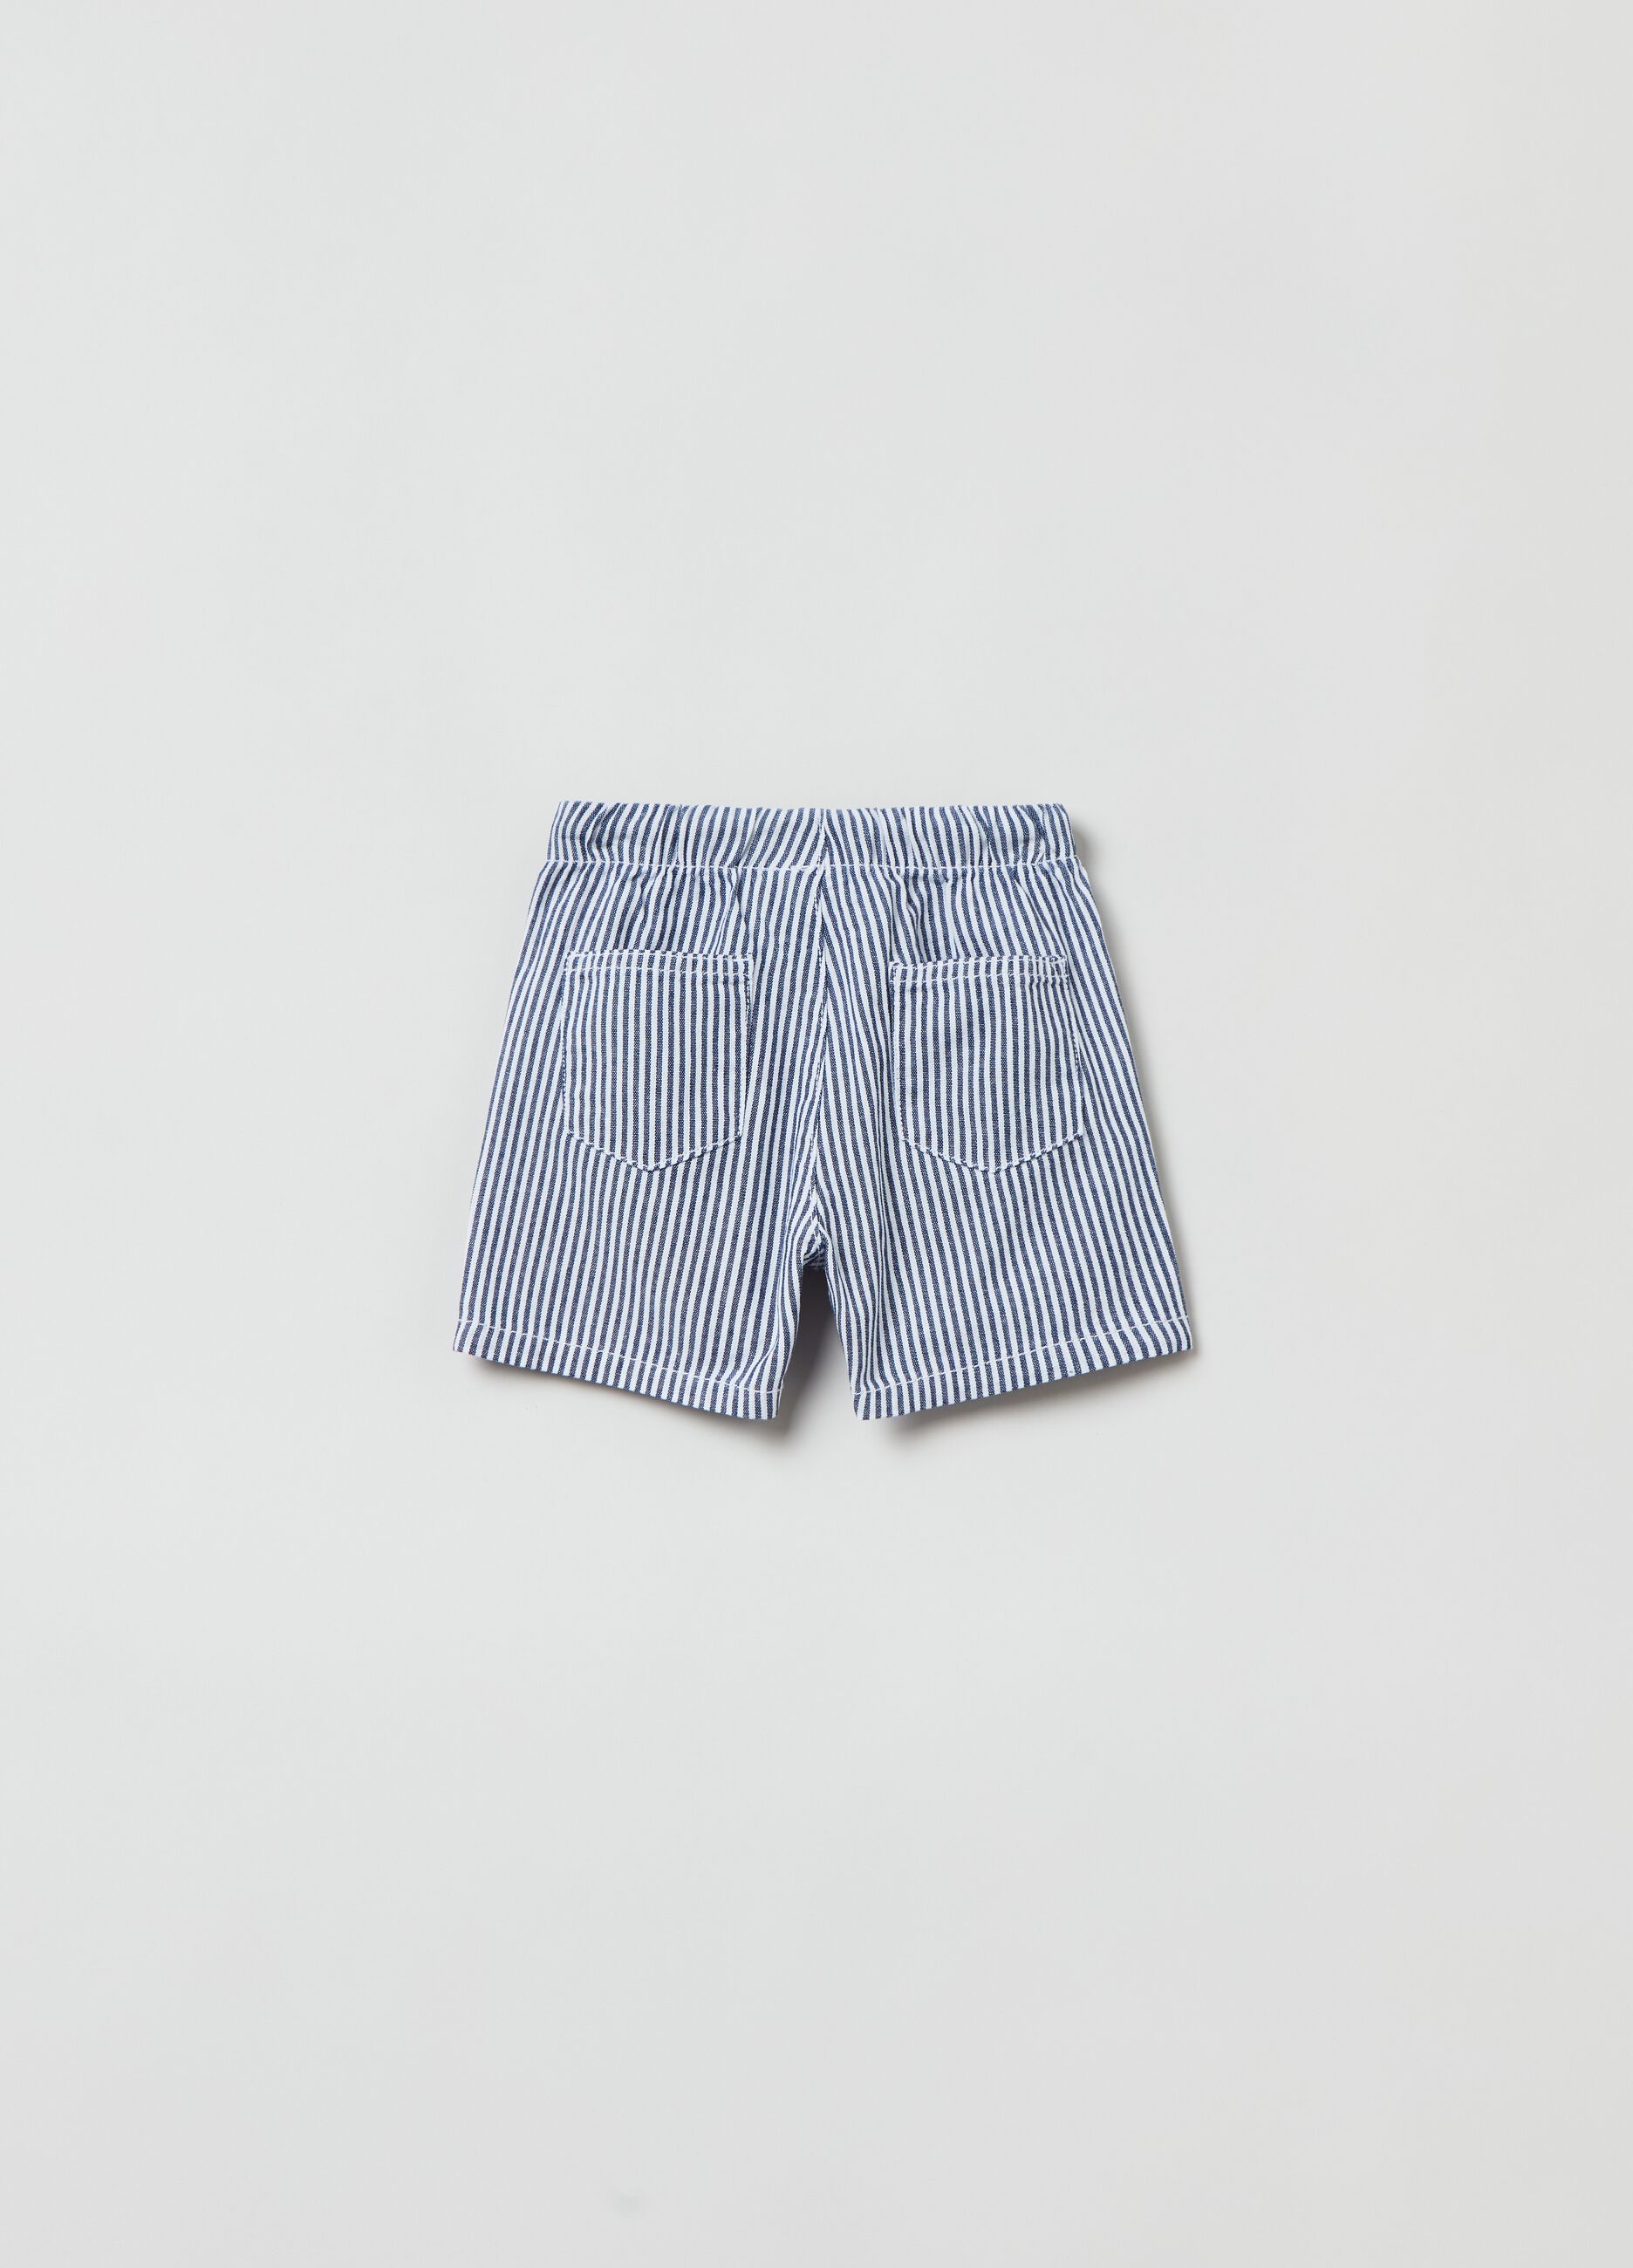 Shorts in yarn-dyed striped cotton